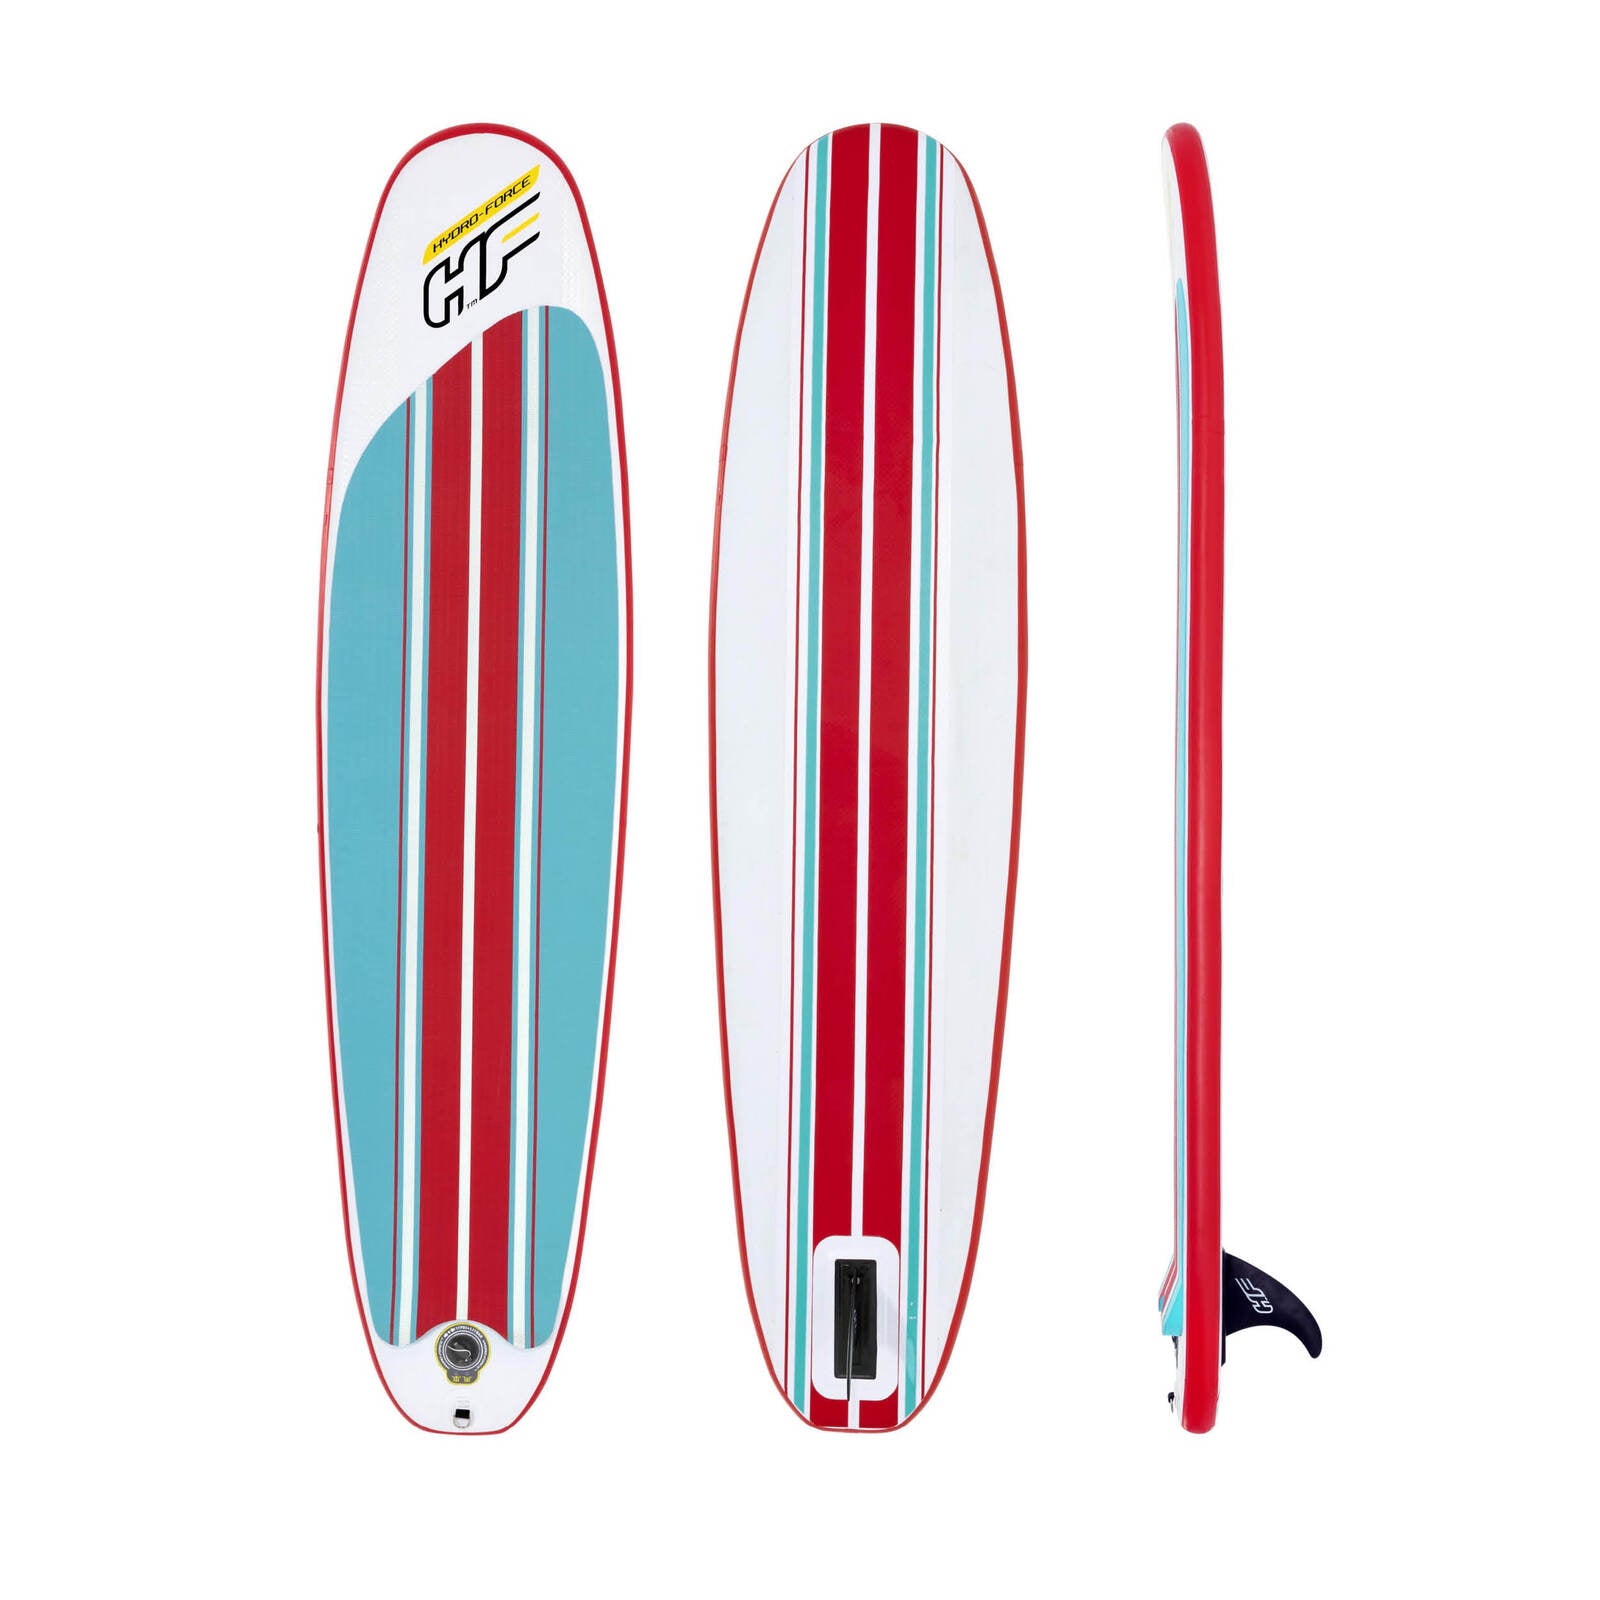 Bestway 2.4m Surfboard Inflatable Essentials Included Innovative Technology